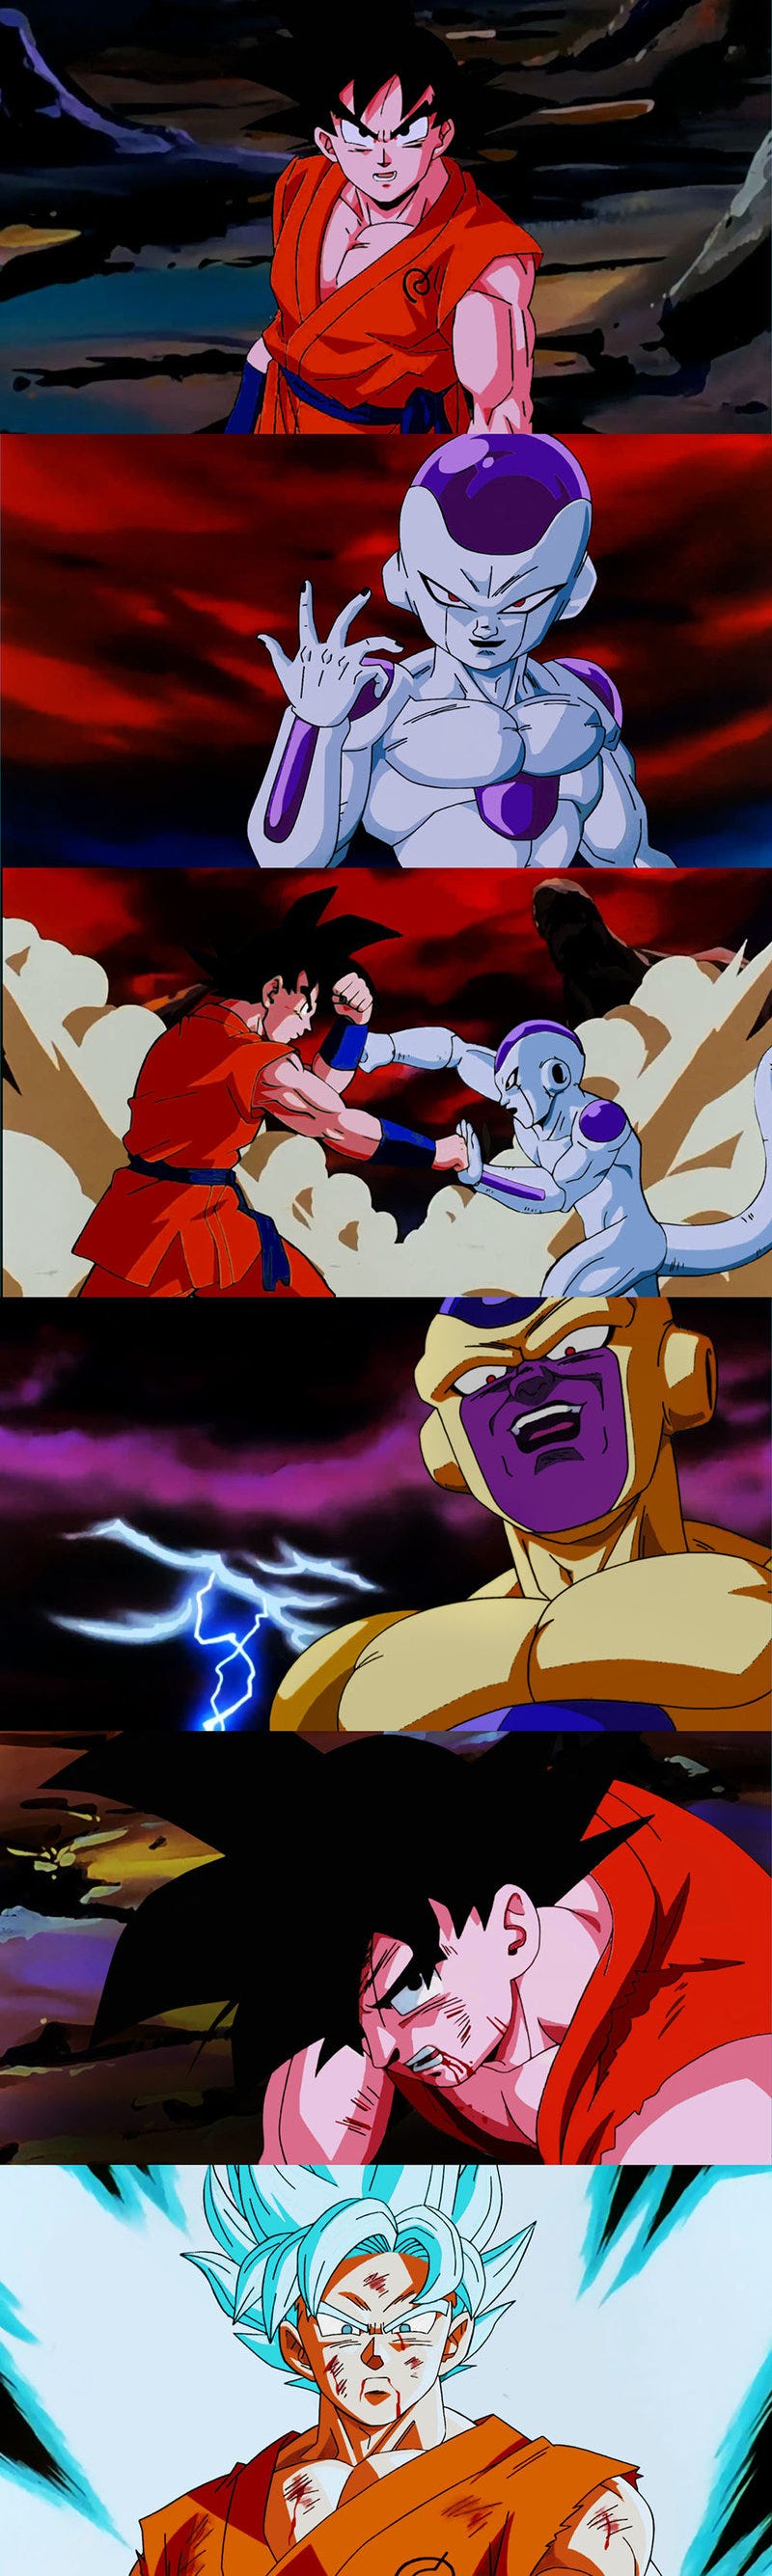 "Dragon Ball Super" in Classic 90's DBZ Style & Coloring